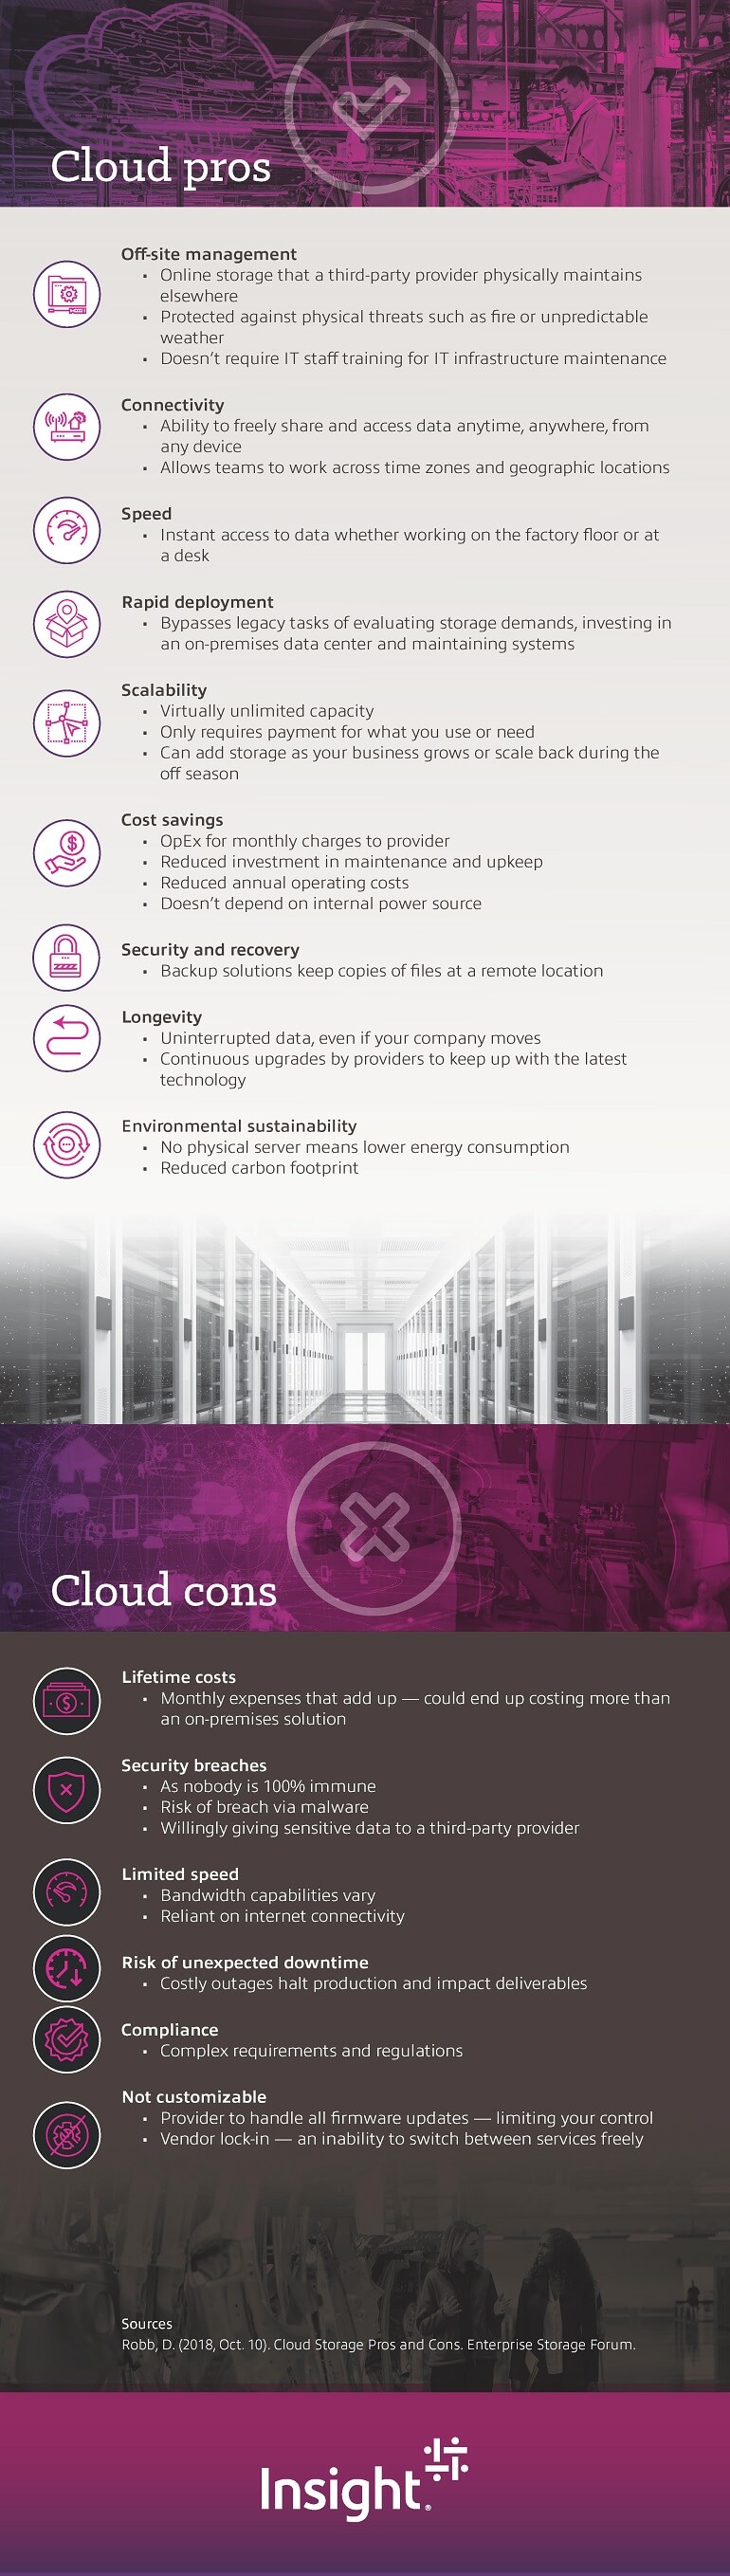 Pros and Cons of the Cloud for Manufacturing listicle as transcribed below